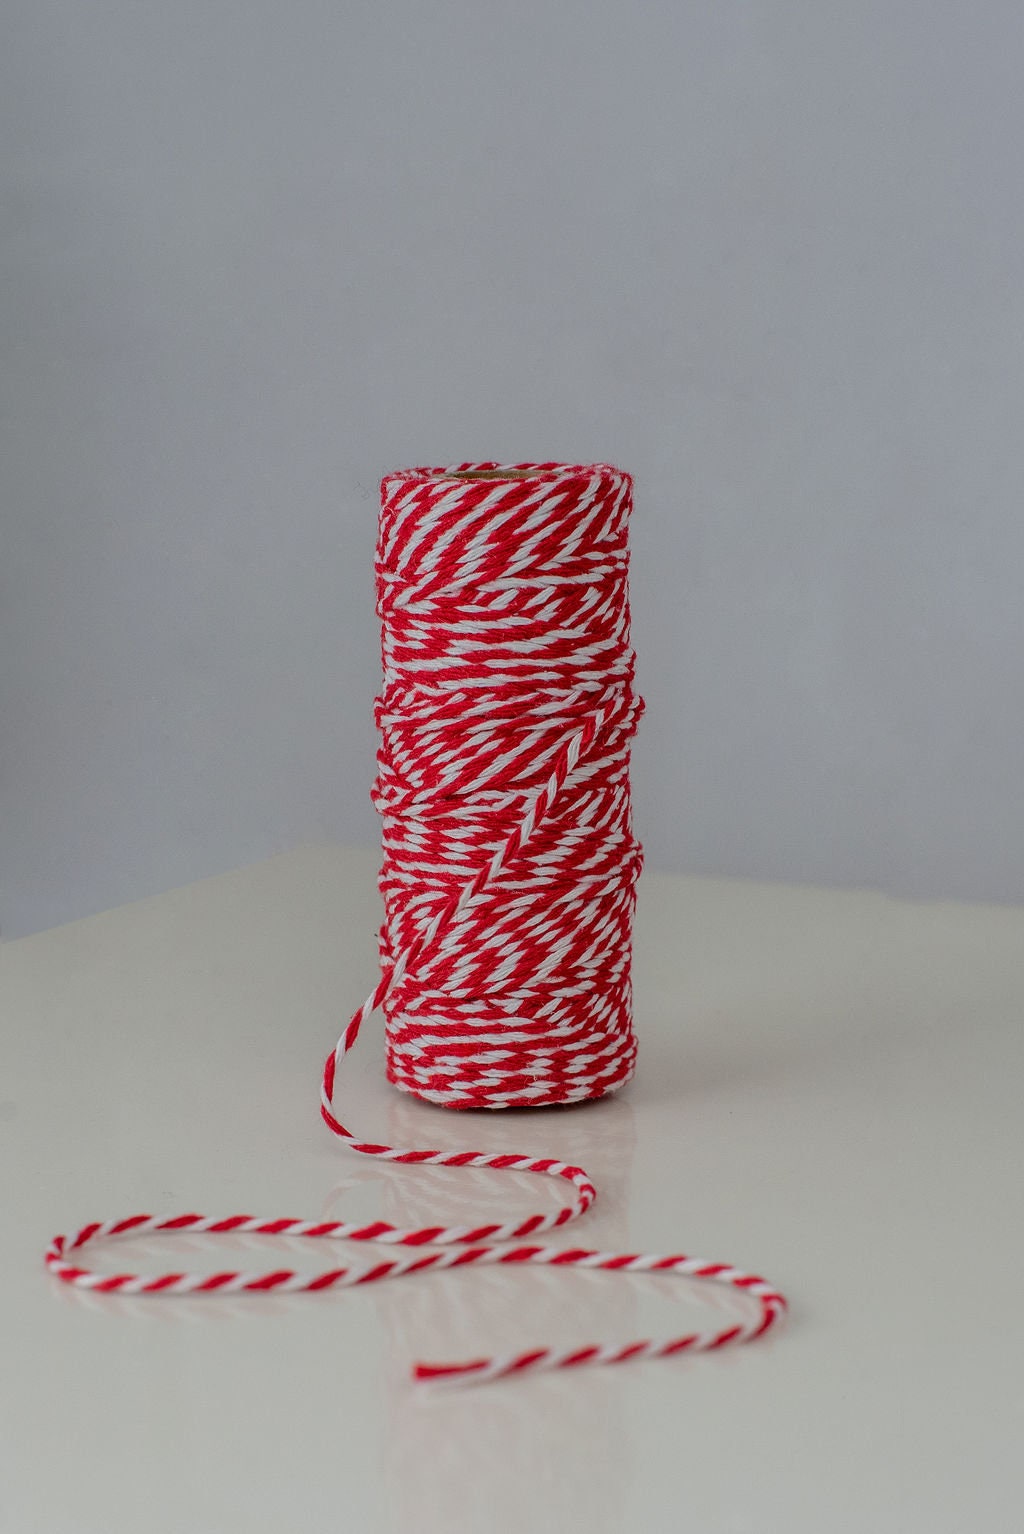 Vivifying Red and White Bakers Twine, 656 Feet Cotton String for DIY Crafts, Christmas Gift Wrapping